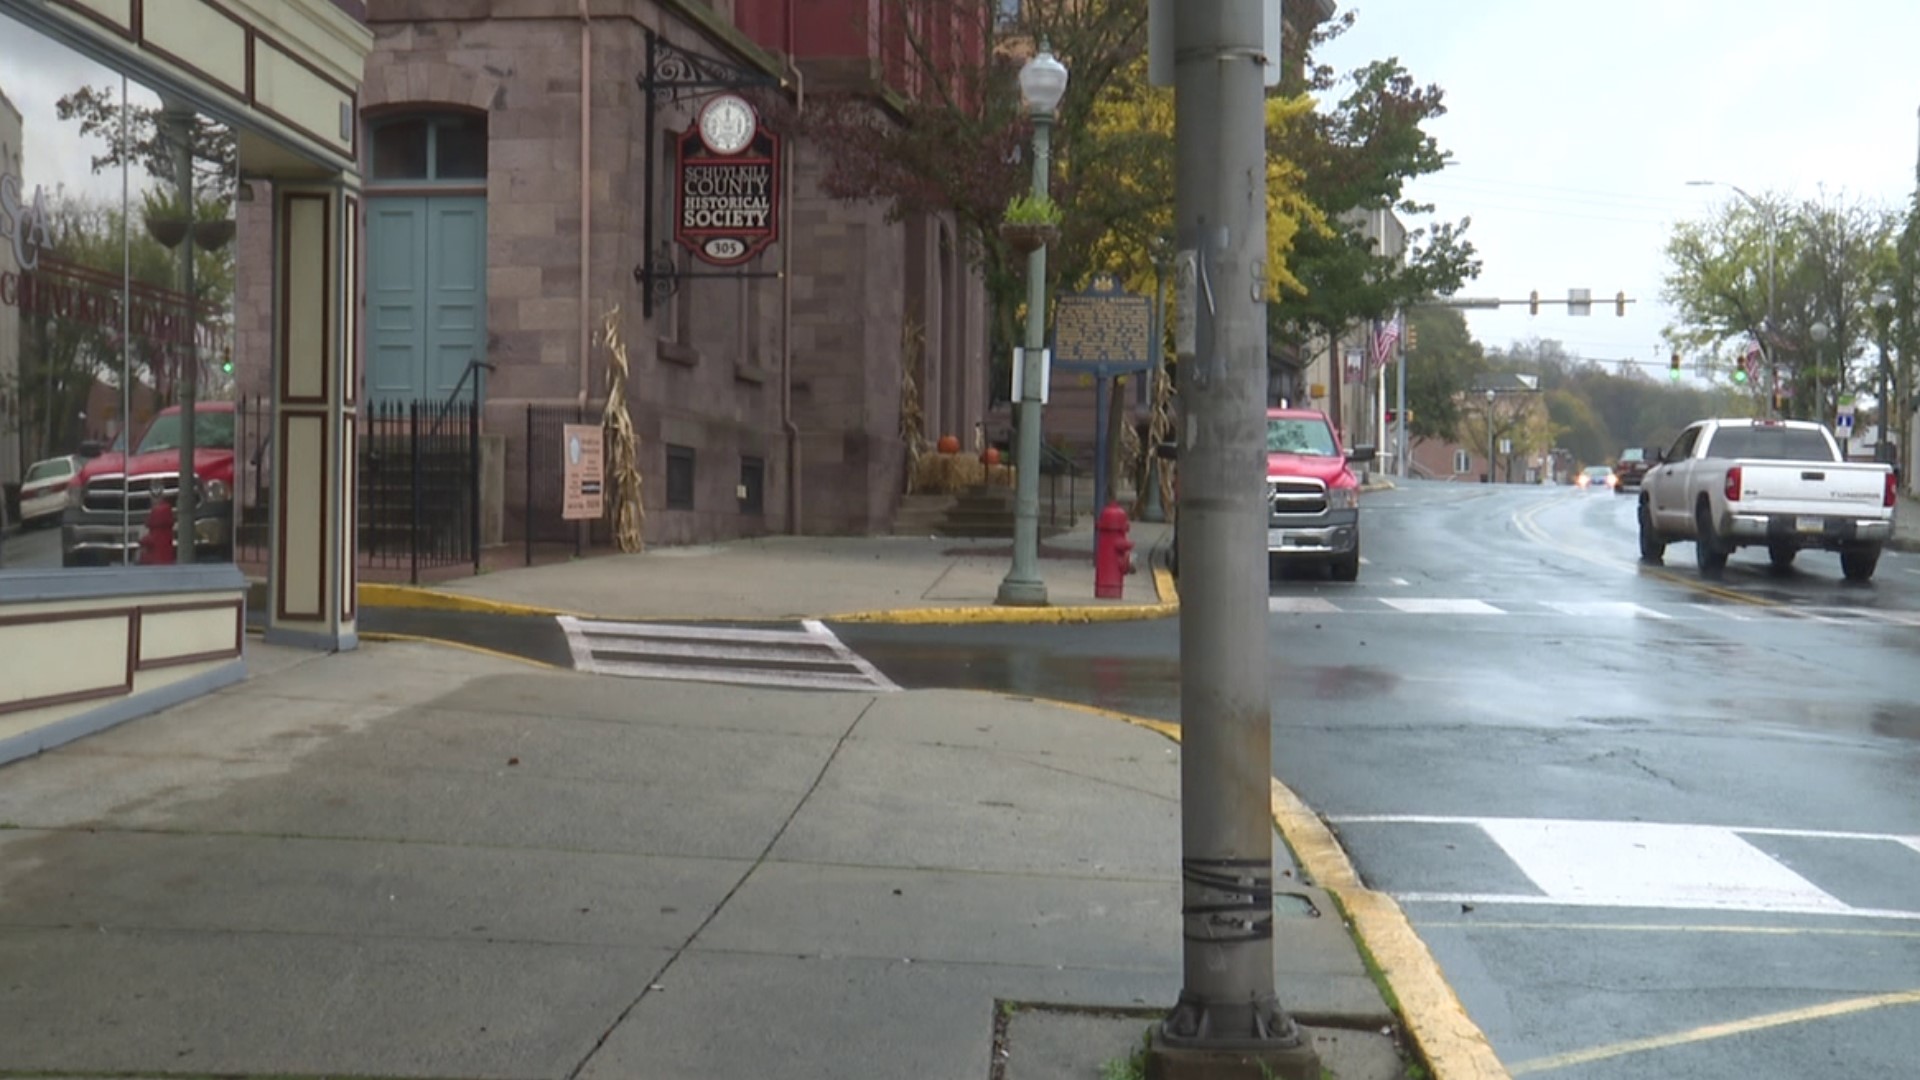 Police in Pottsville say they've found the driver they believe hit a twelve-year-old girl in the city's downtown area and took off.